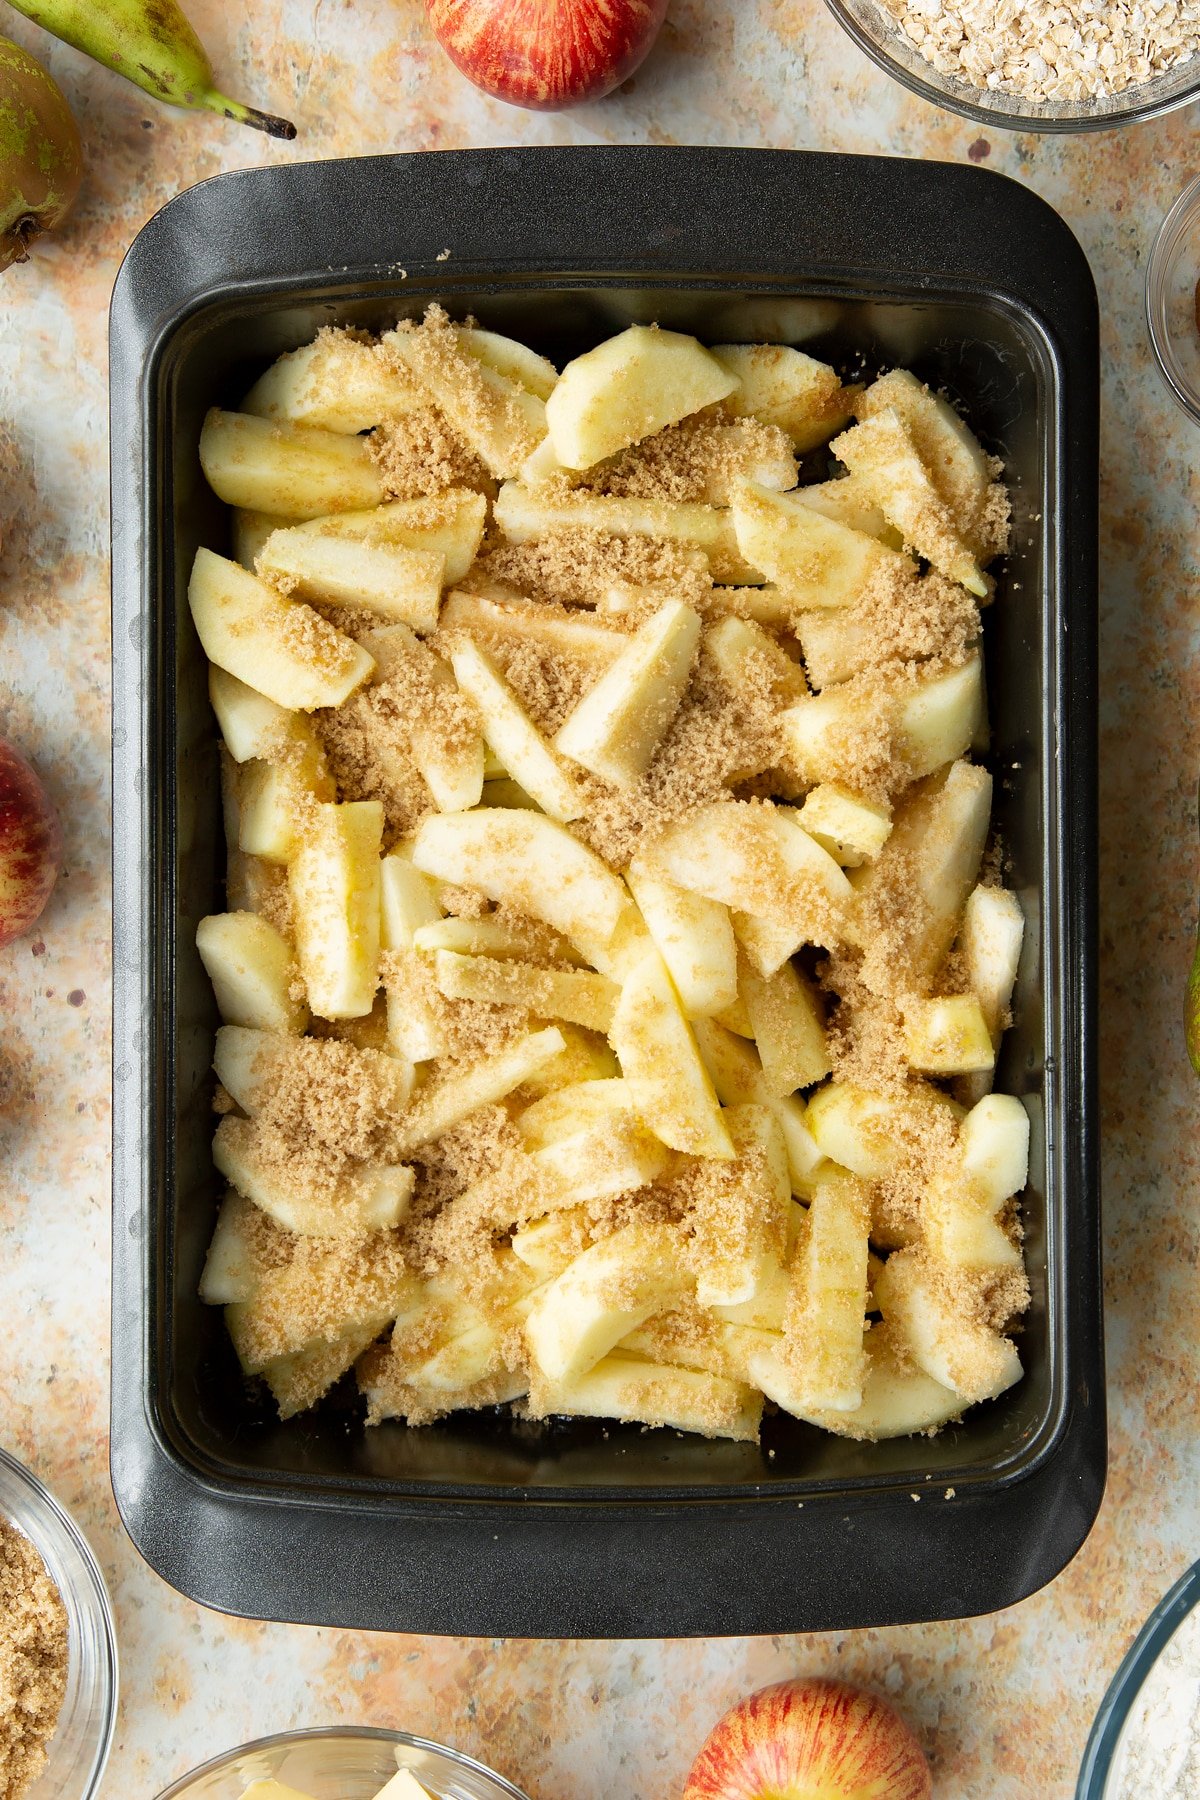 Peeled apple and pear wedges, topped with light brown sugar in a greased tray.